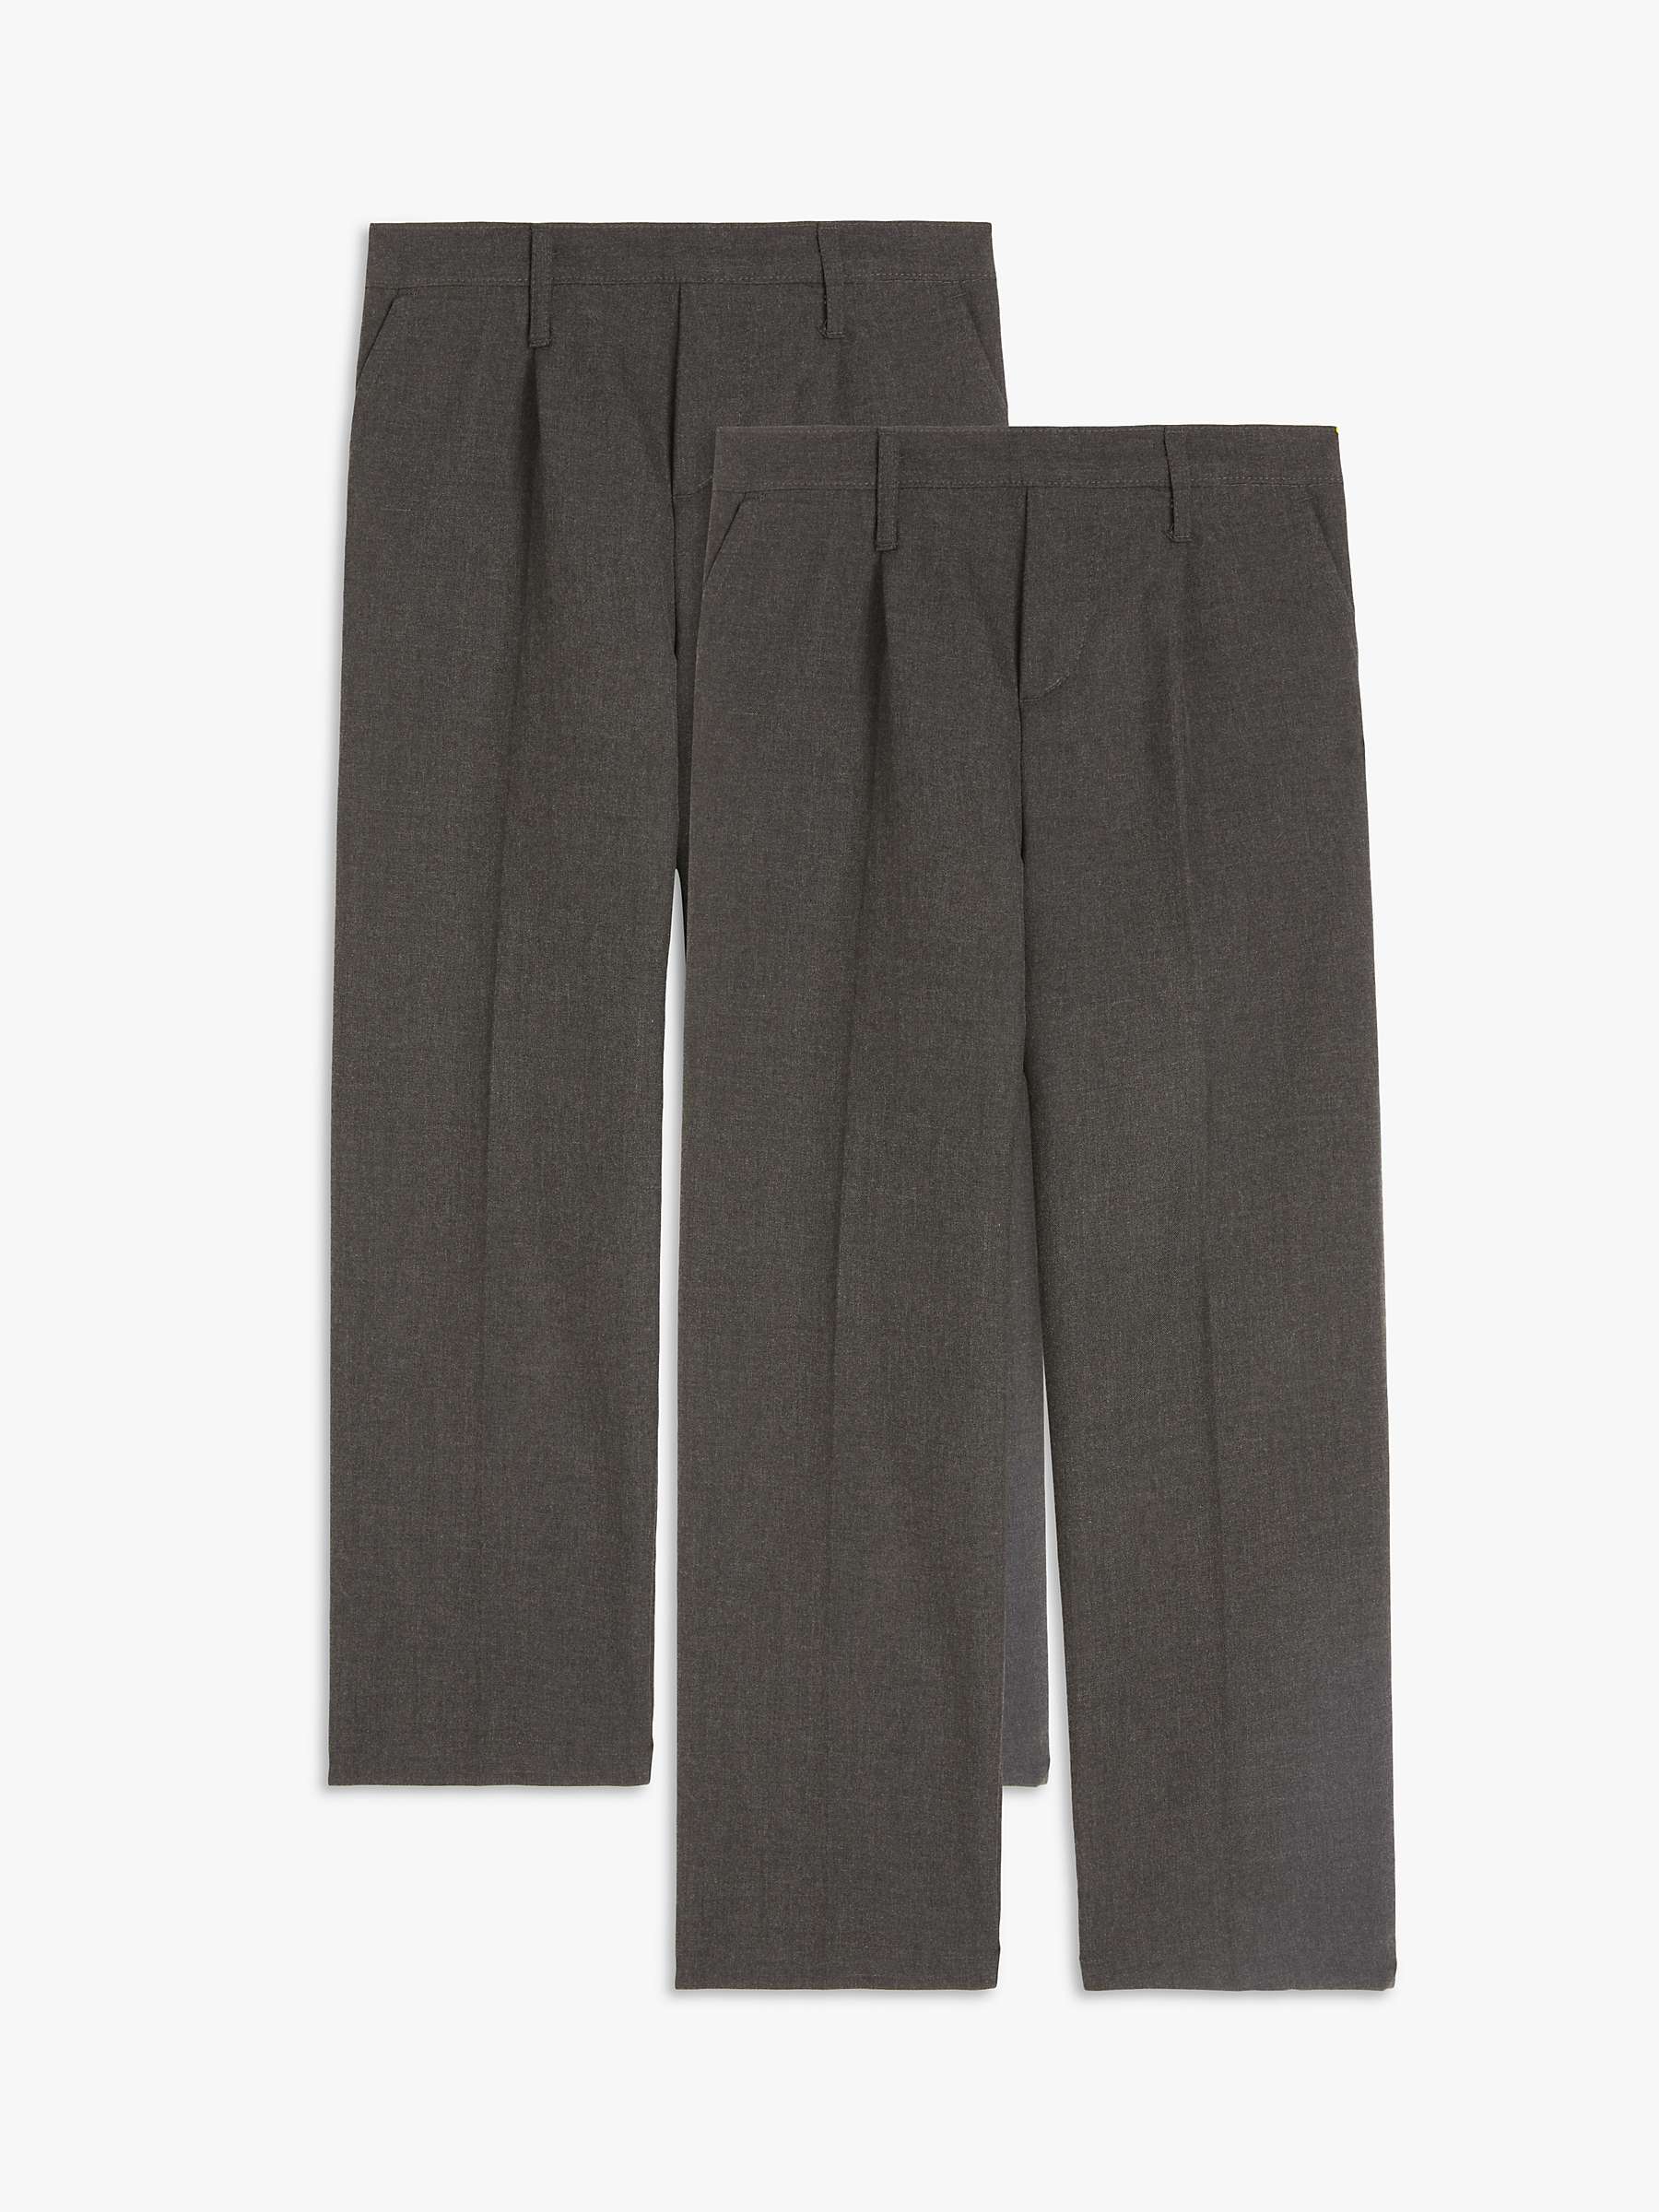 Buy John Lewis ANYDAY The Basics Adjustable Waist Boys' School Trousers, Pack of 2 Online at johnlewis.com